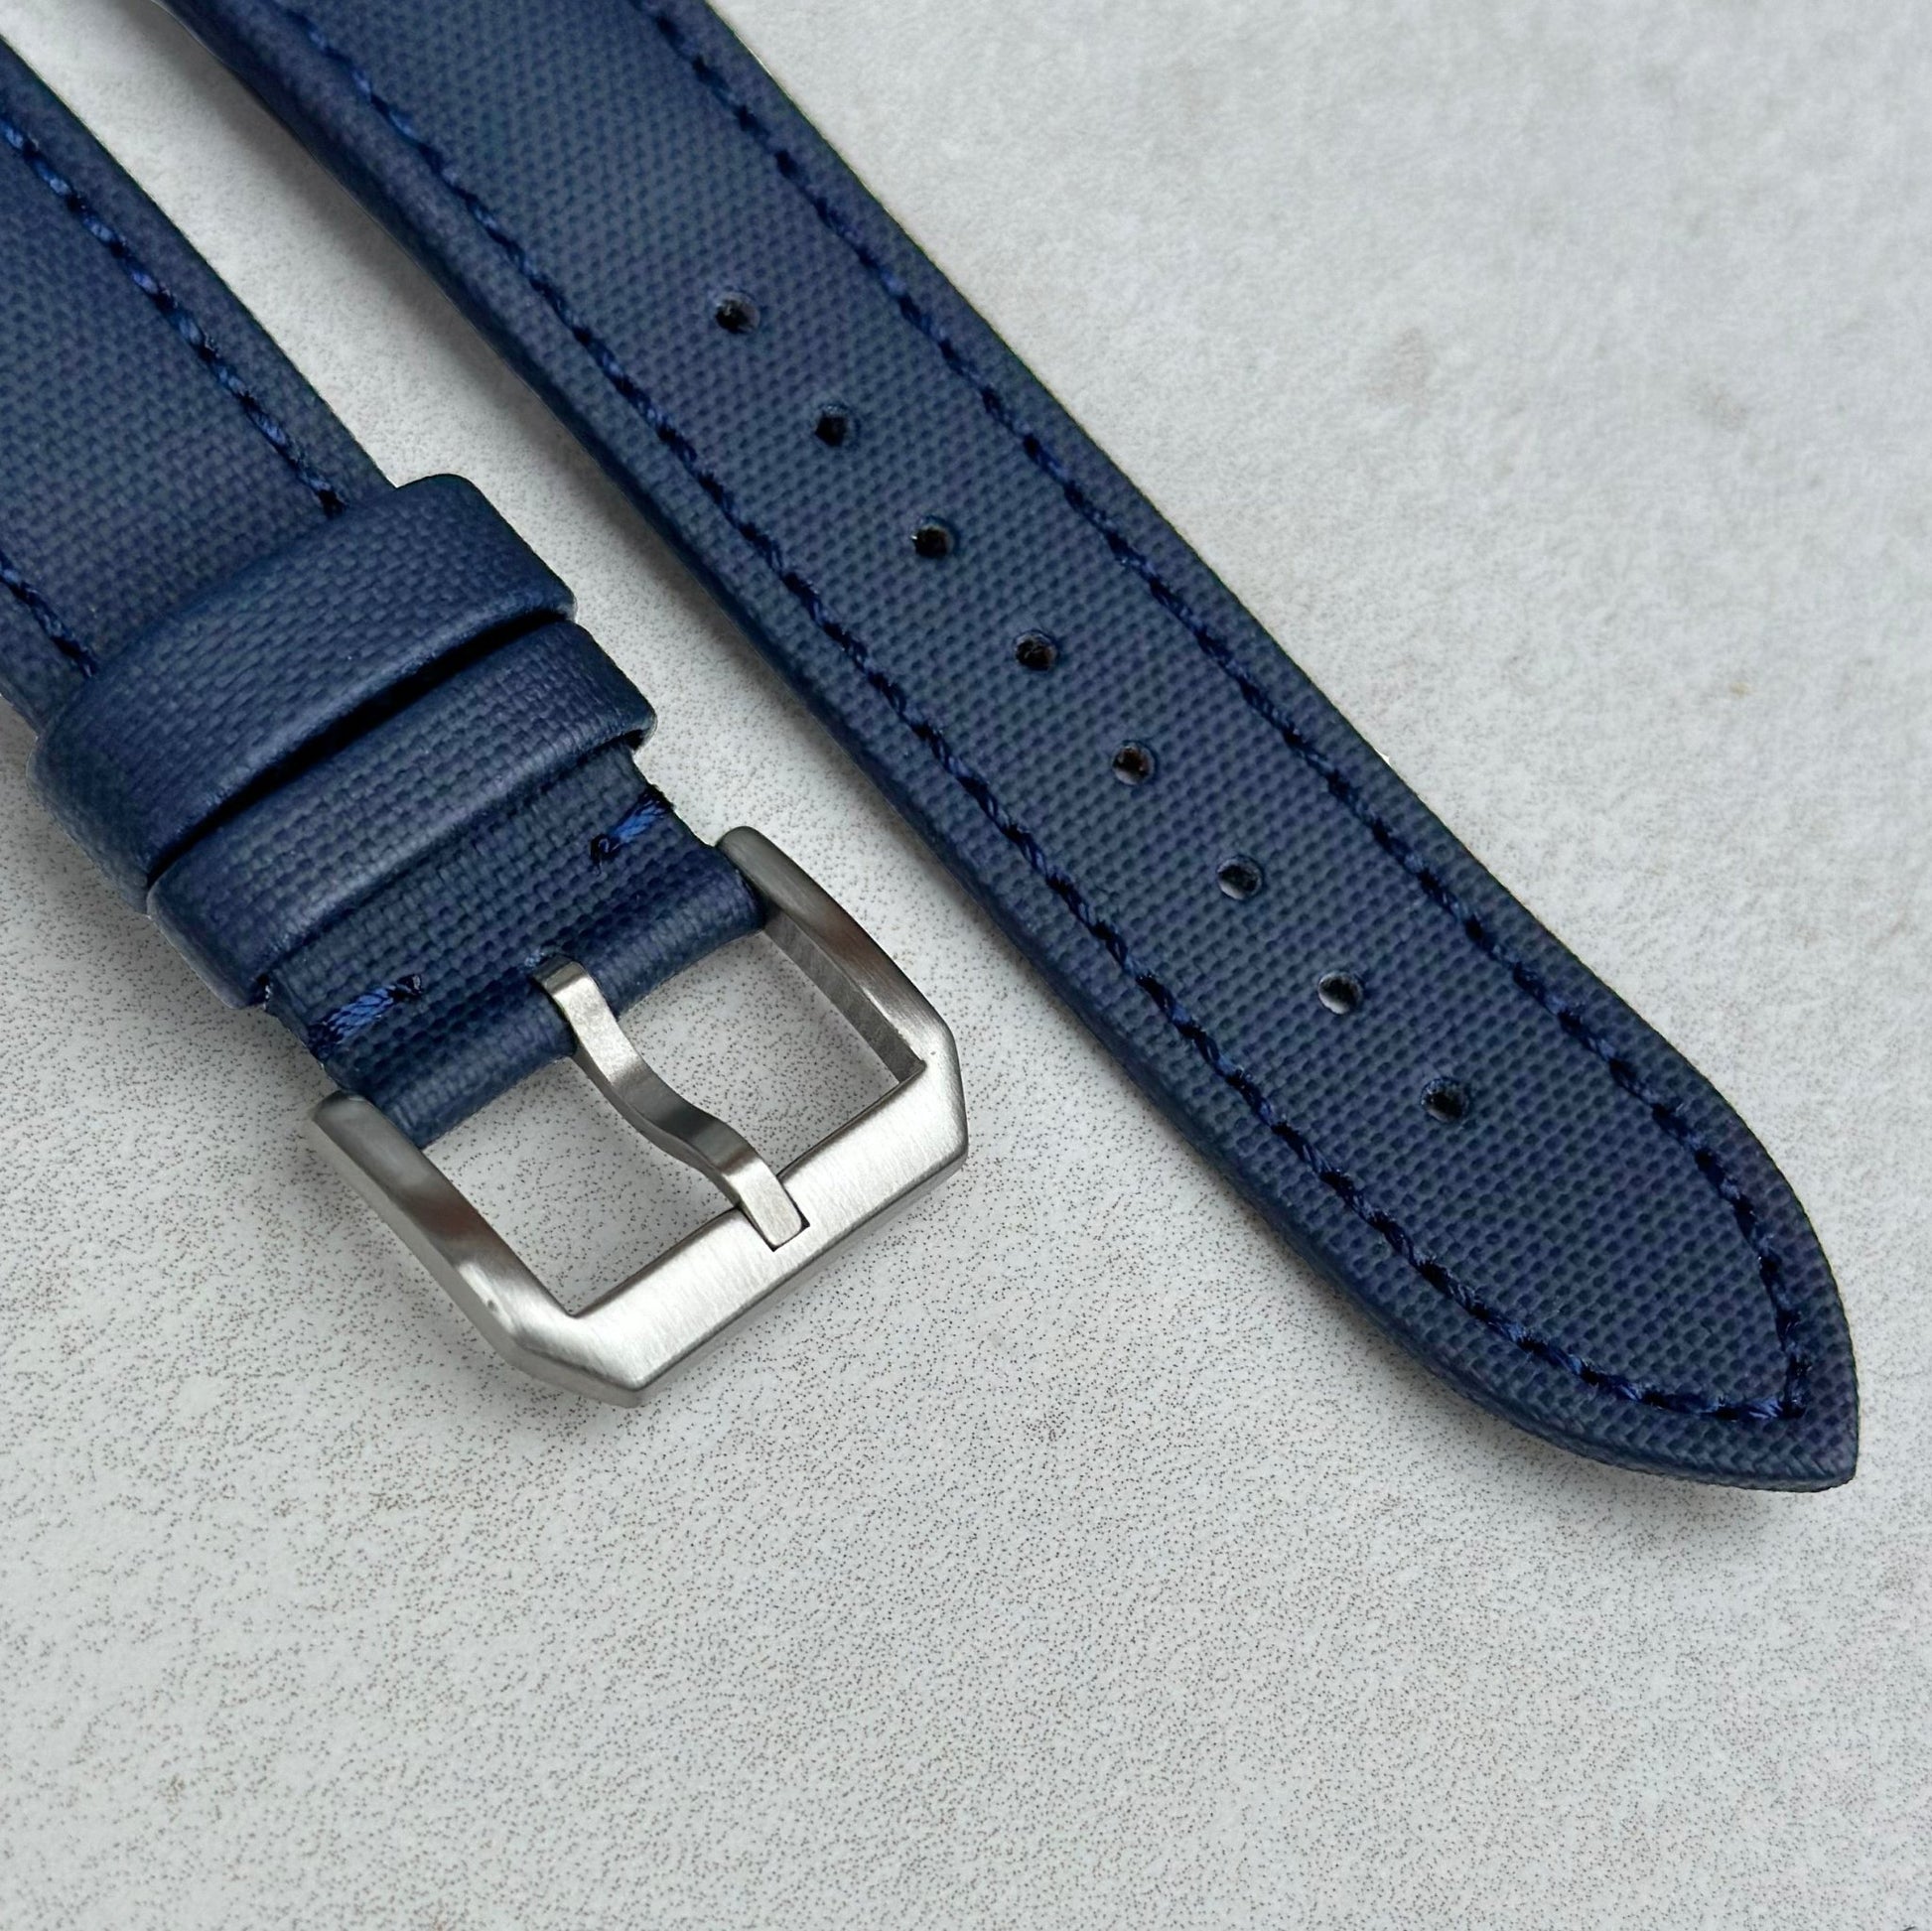 Brushed 316L stainless steel buckle on the Bermuda navy blue sail cloth watch strap. Watch And Strap